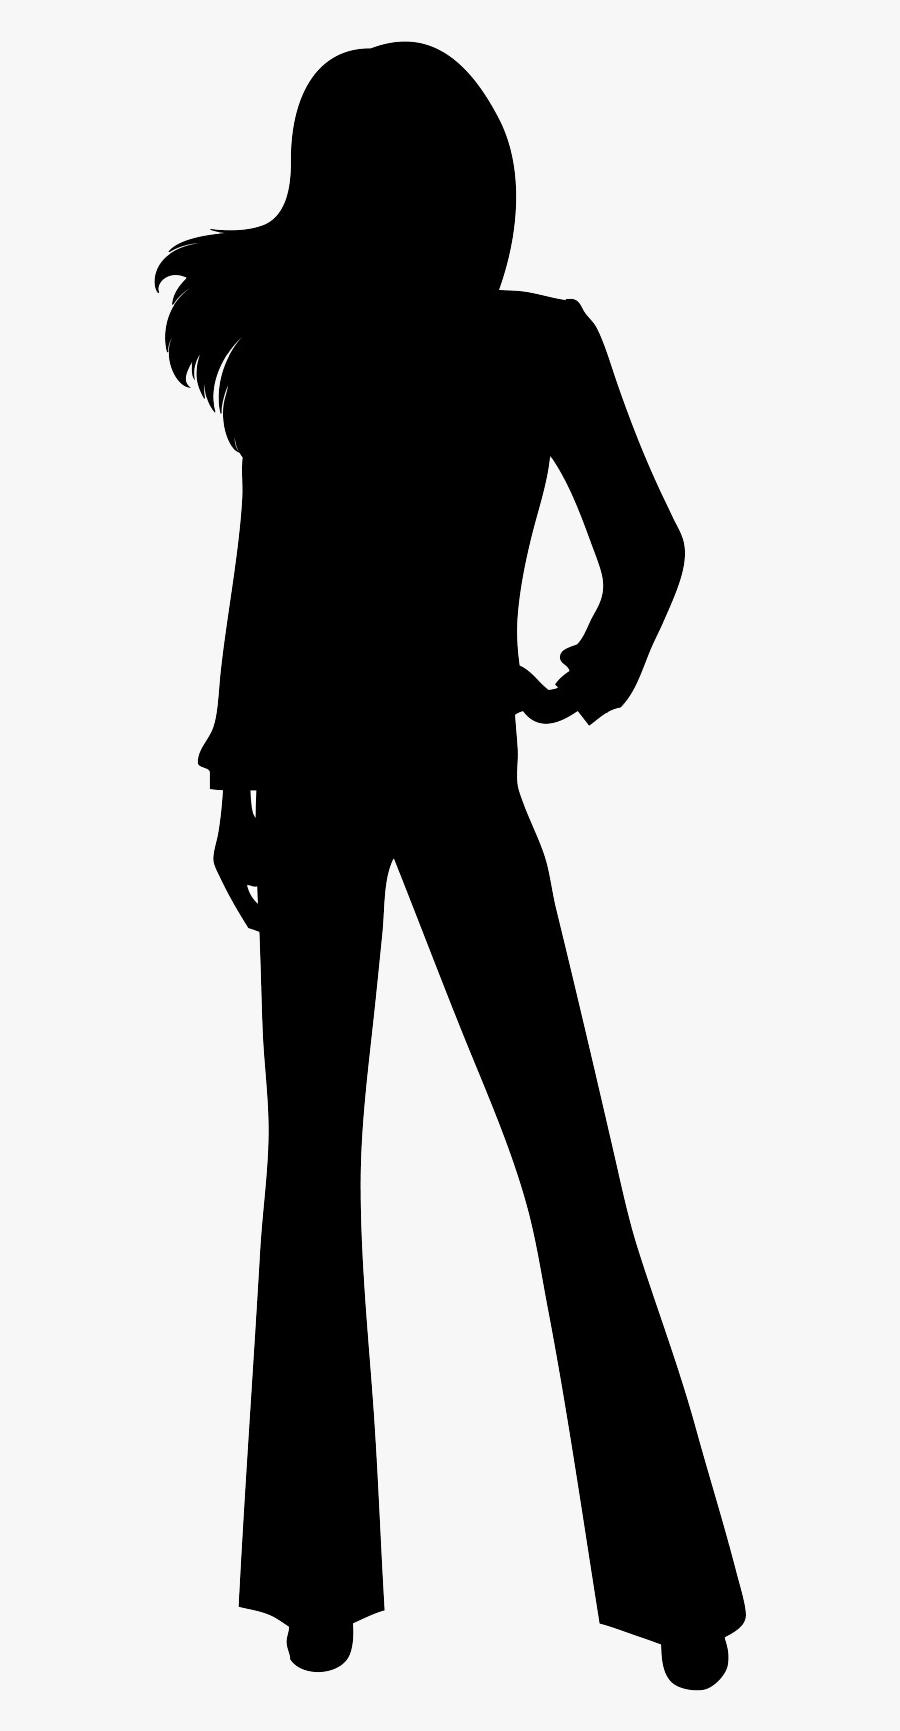 Hula Hoops Hooping Clothing - Business Woman Silhouette Png, Transparent Clipart